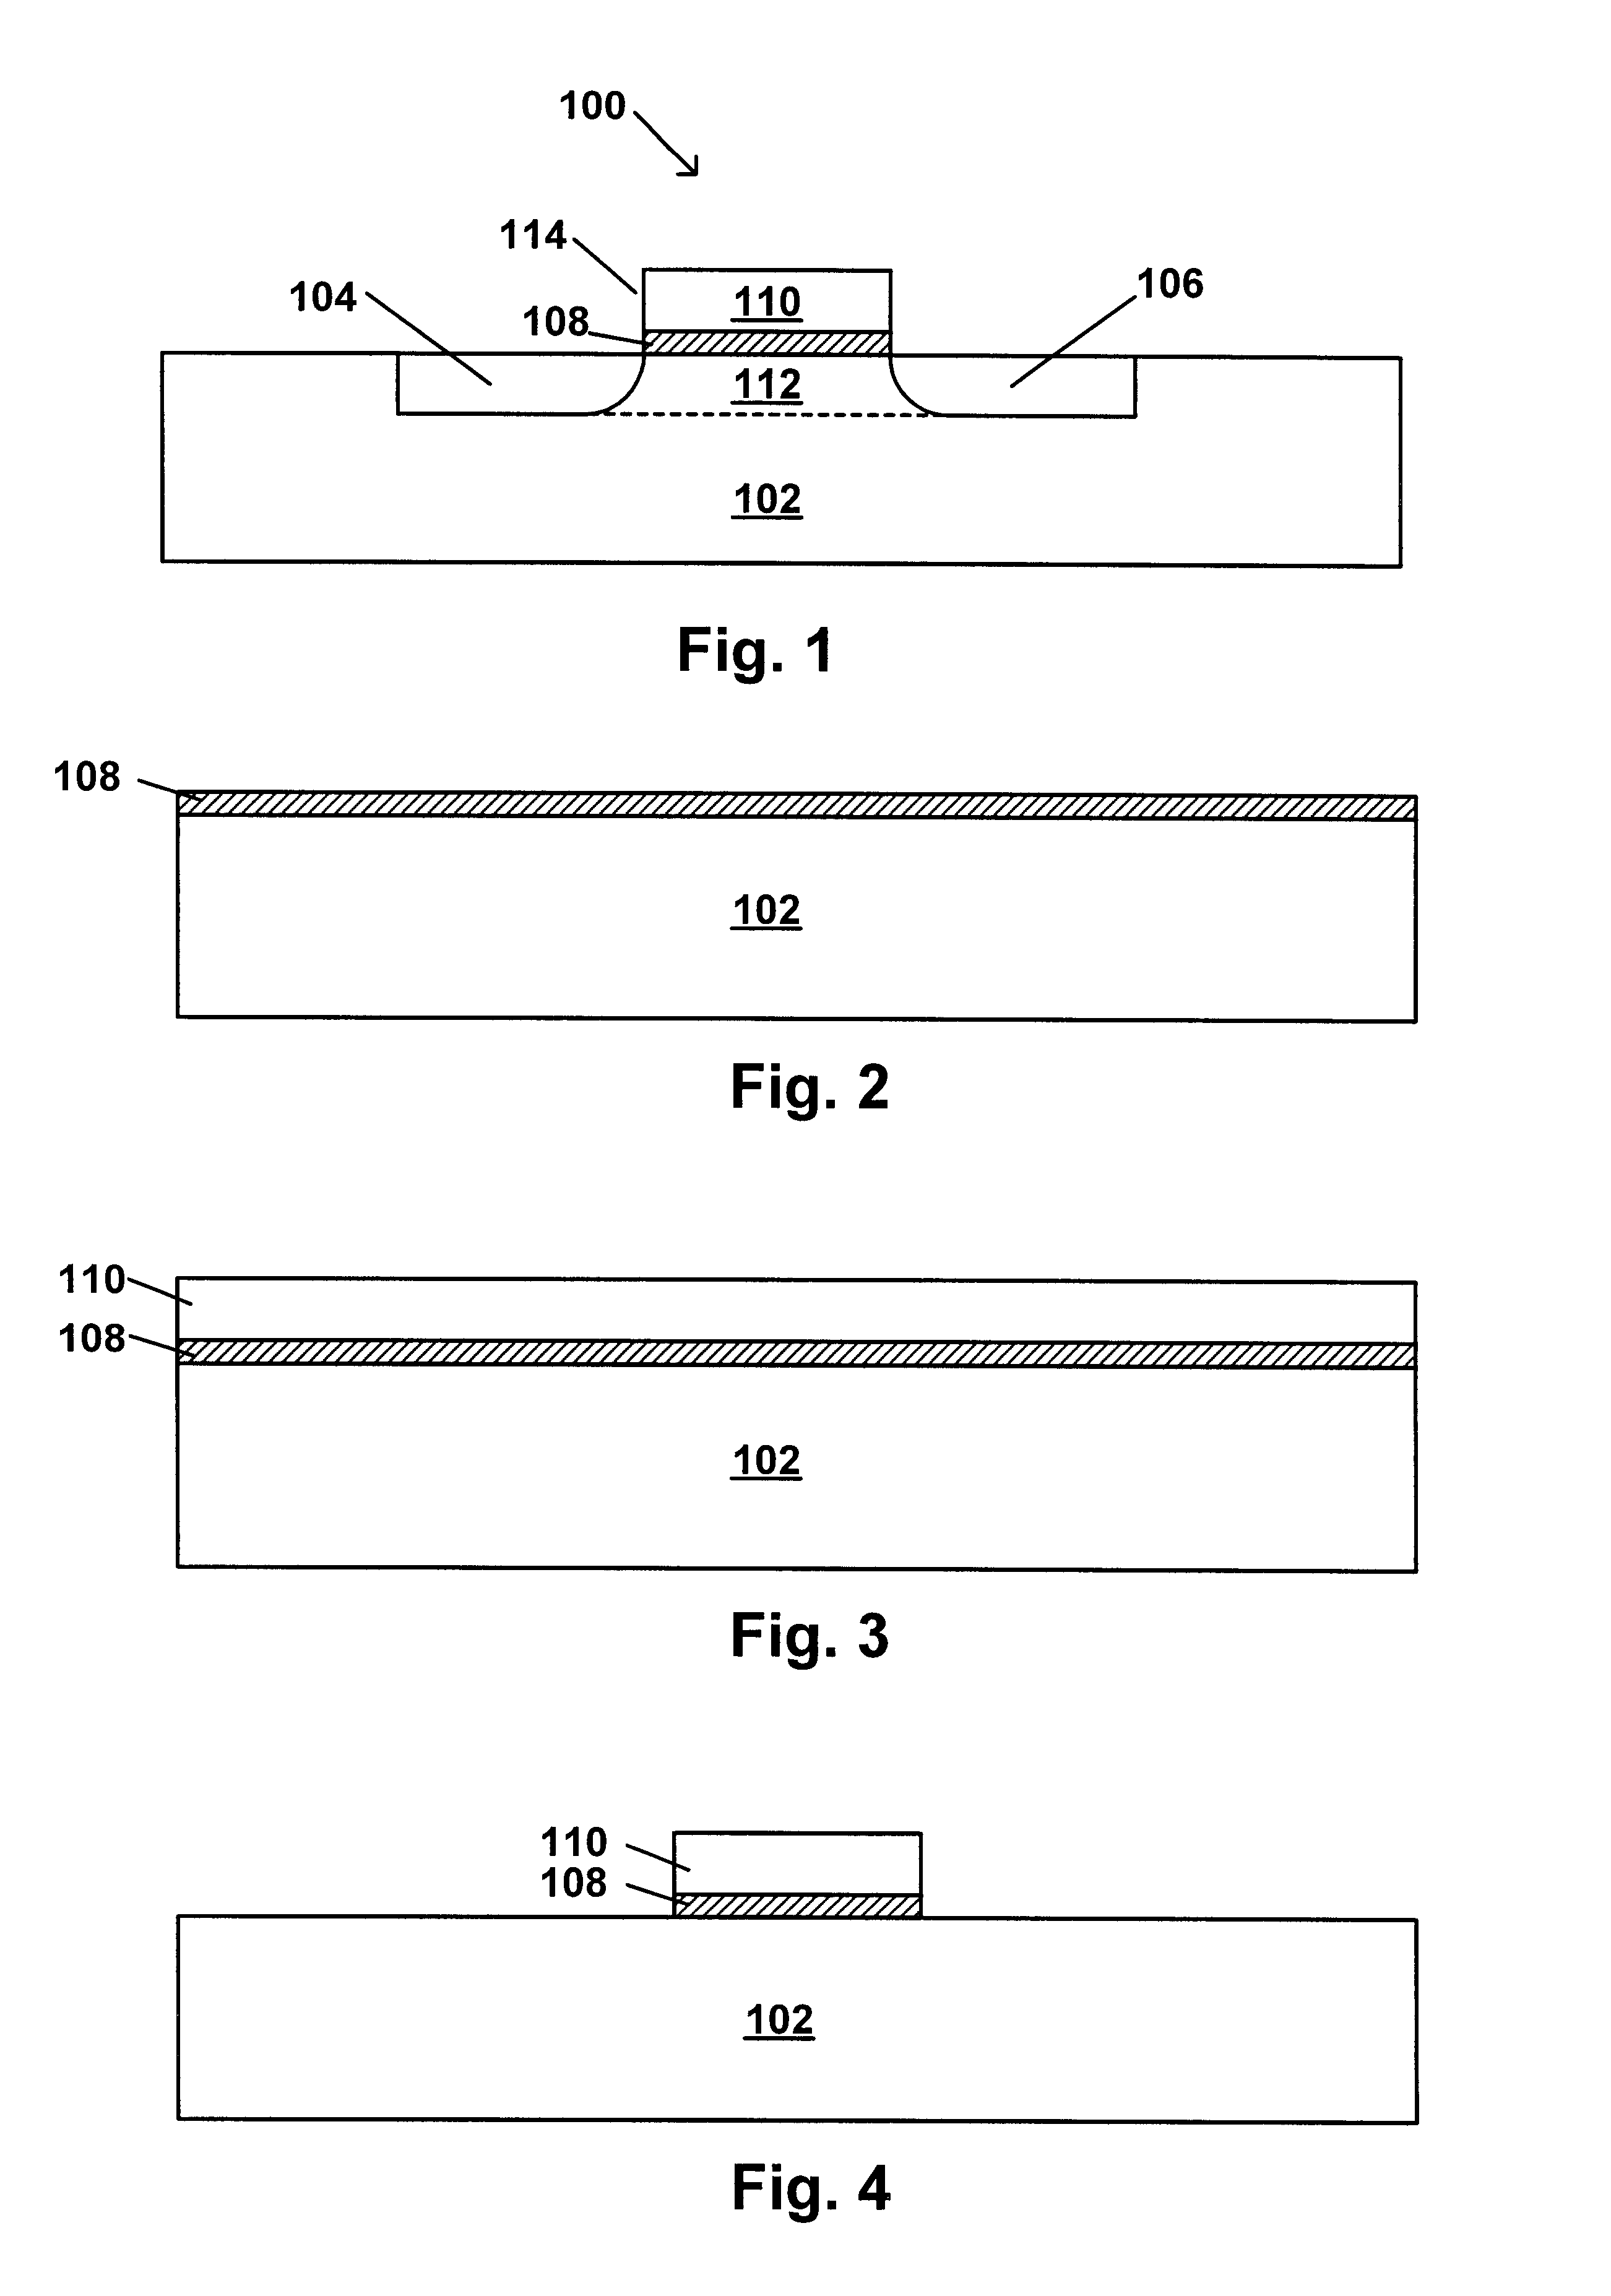 Non-reducing process for deposition of polysilicon gate electrode over high-K gate dielectric material